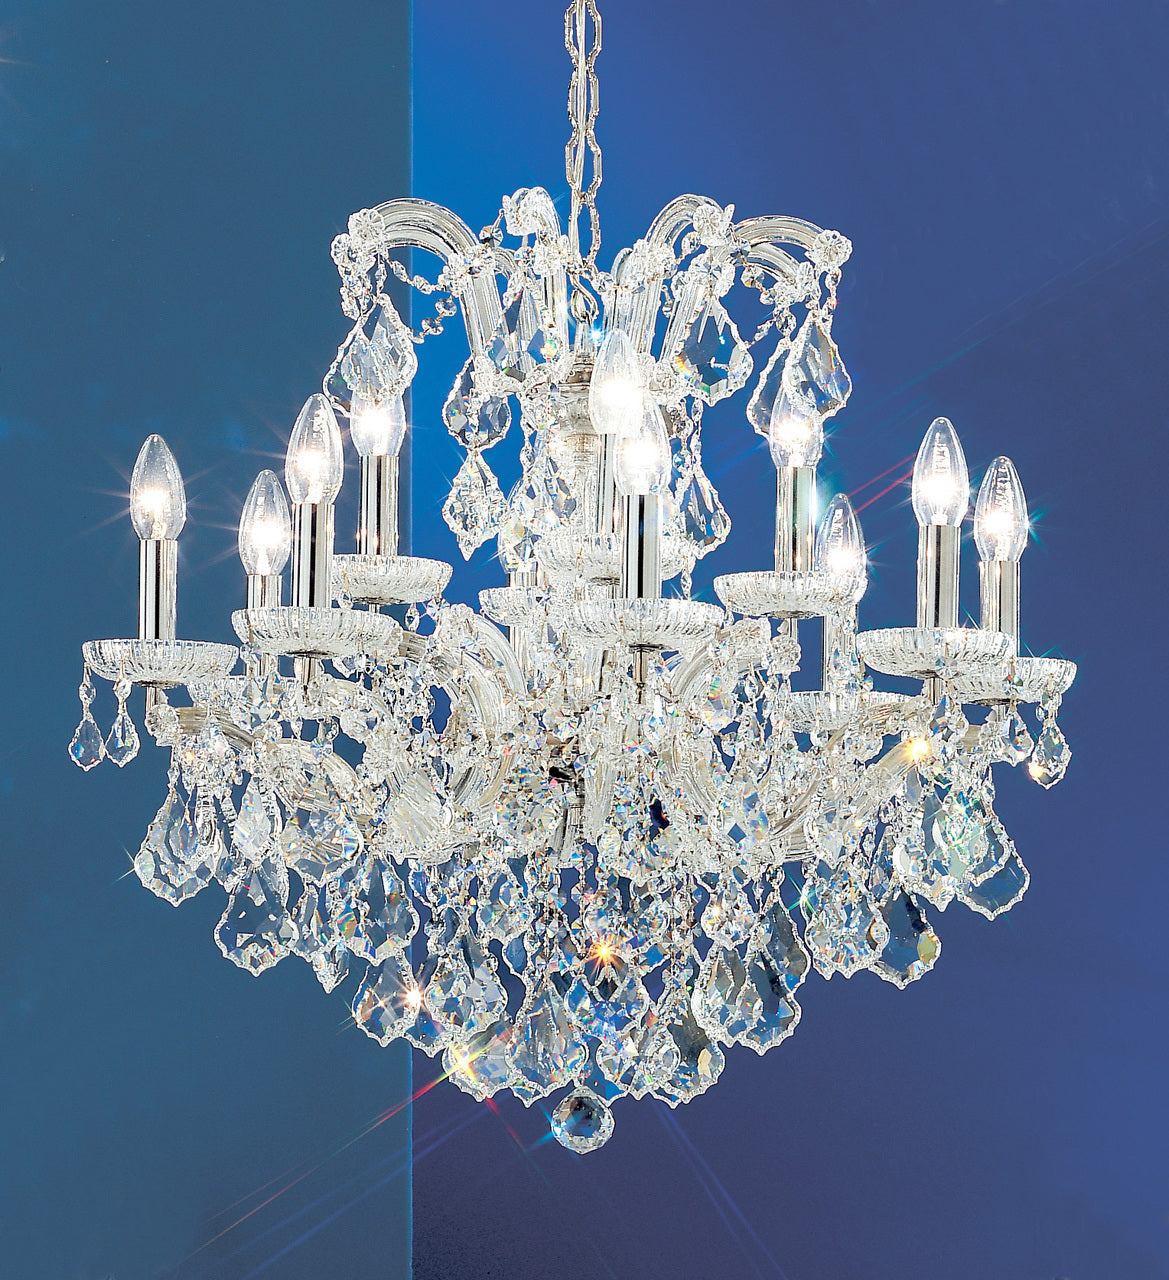 Classic Lighting 8132 OWG C Maria Theresa Traditional Crystal Chandelier in Olde World Gold (Imported from Italy)